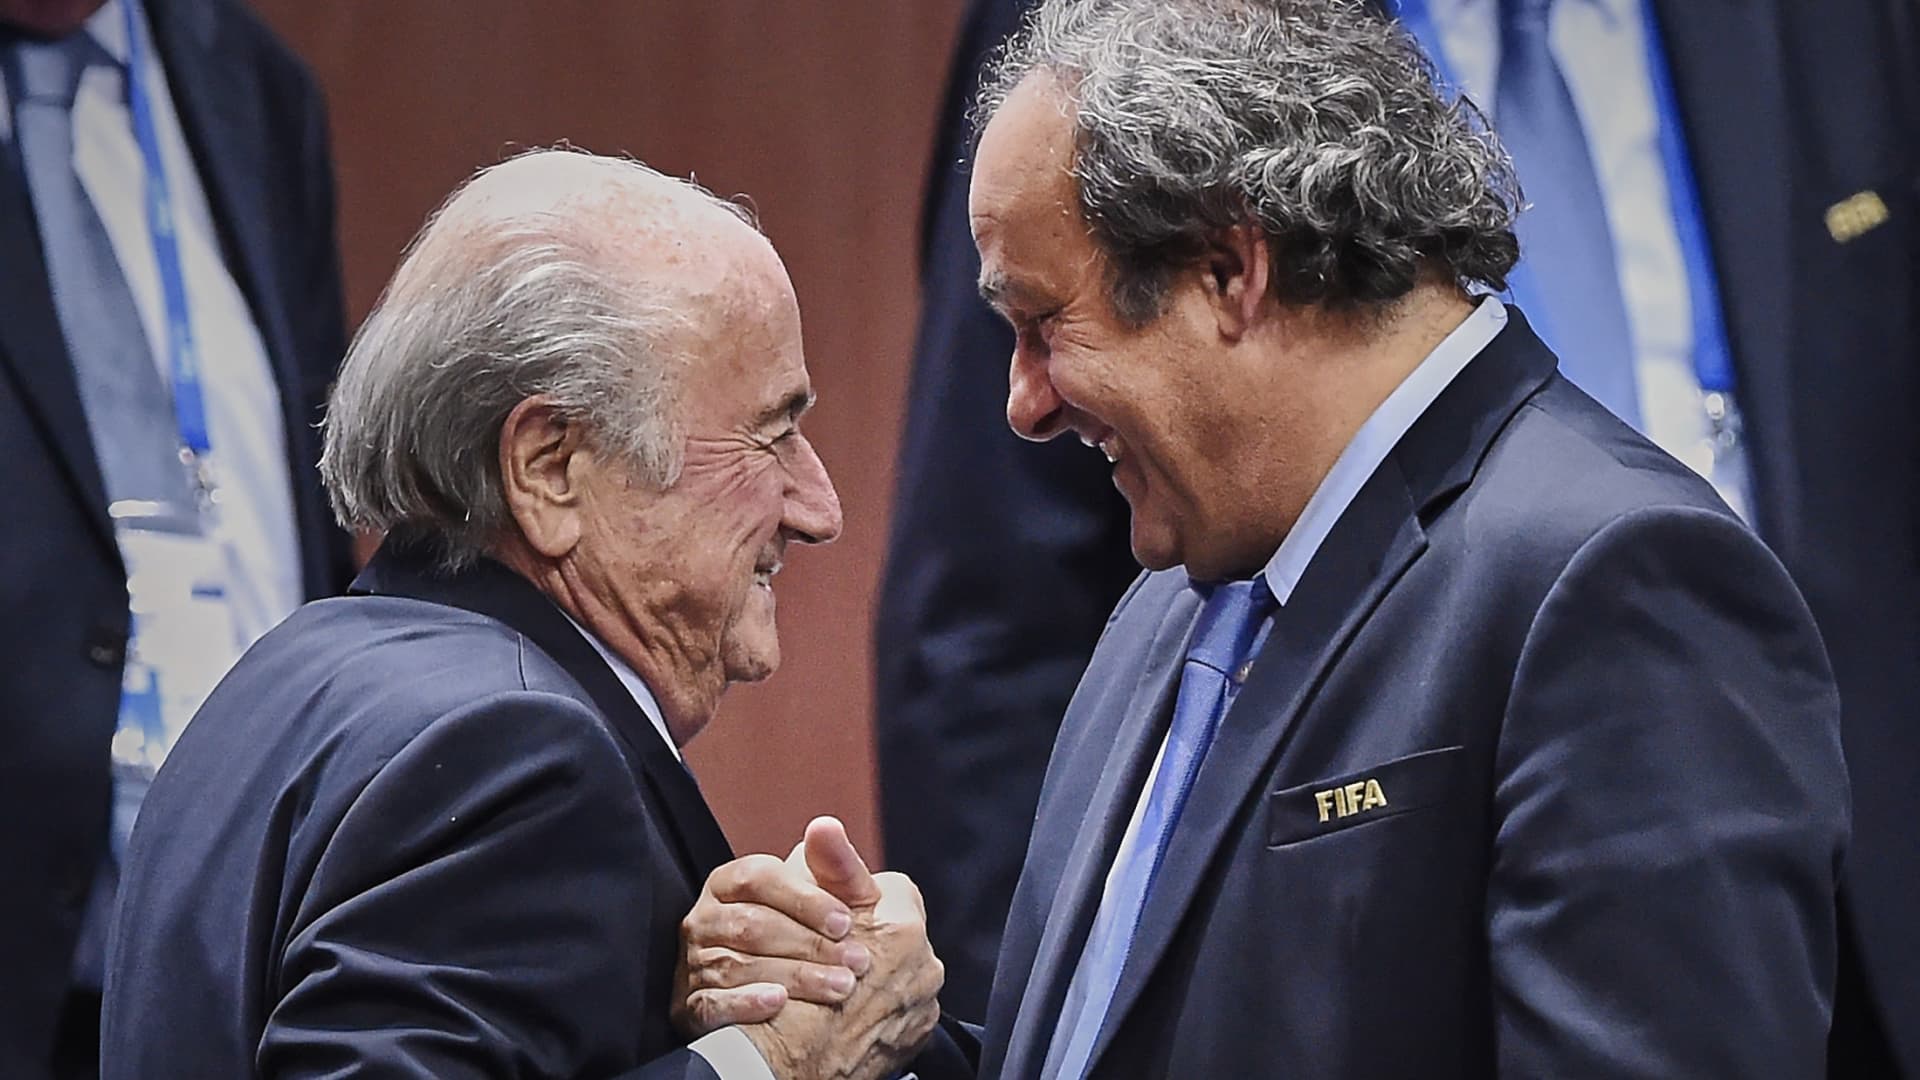 Sepp Blatter and Michel Platini cleared of corruption charges